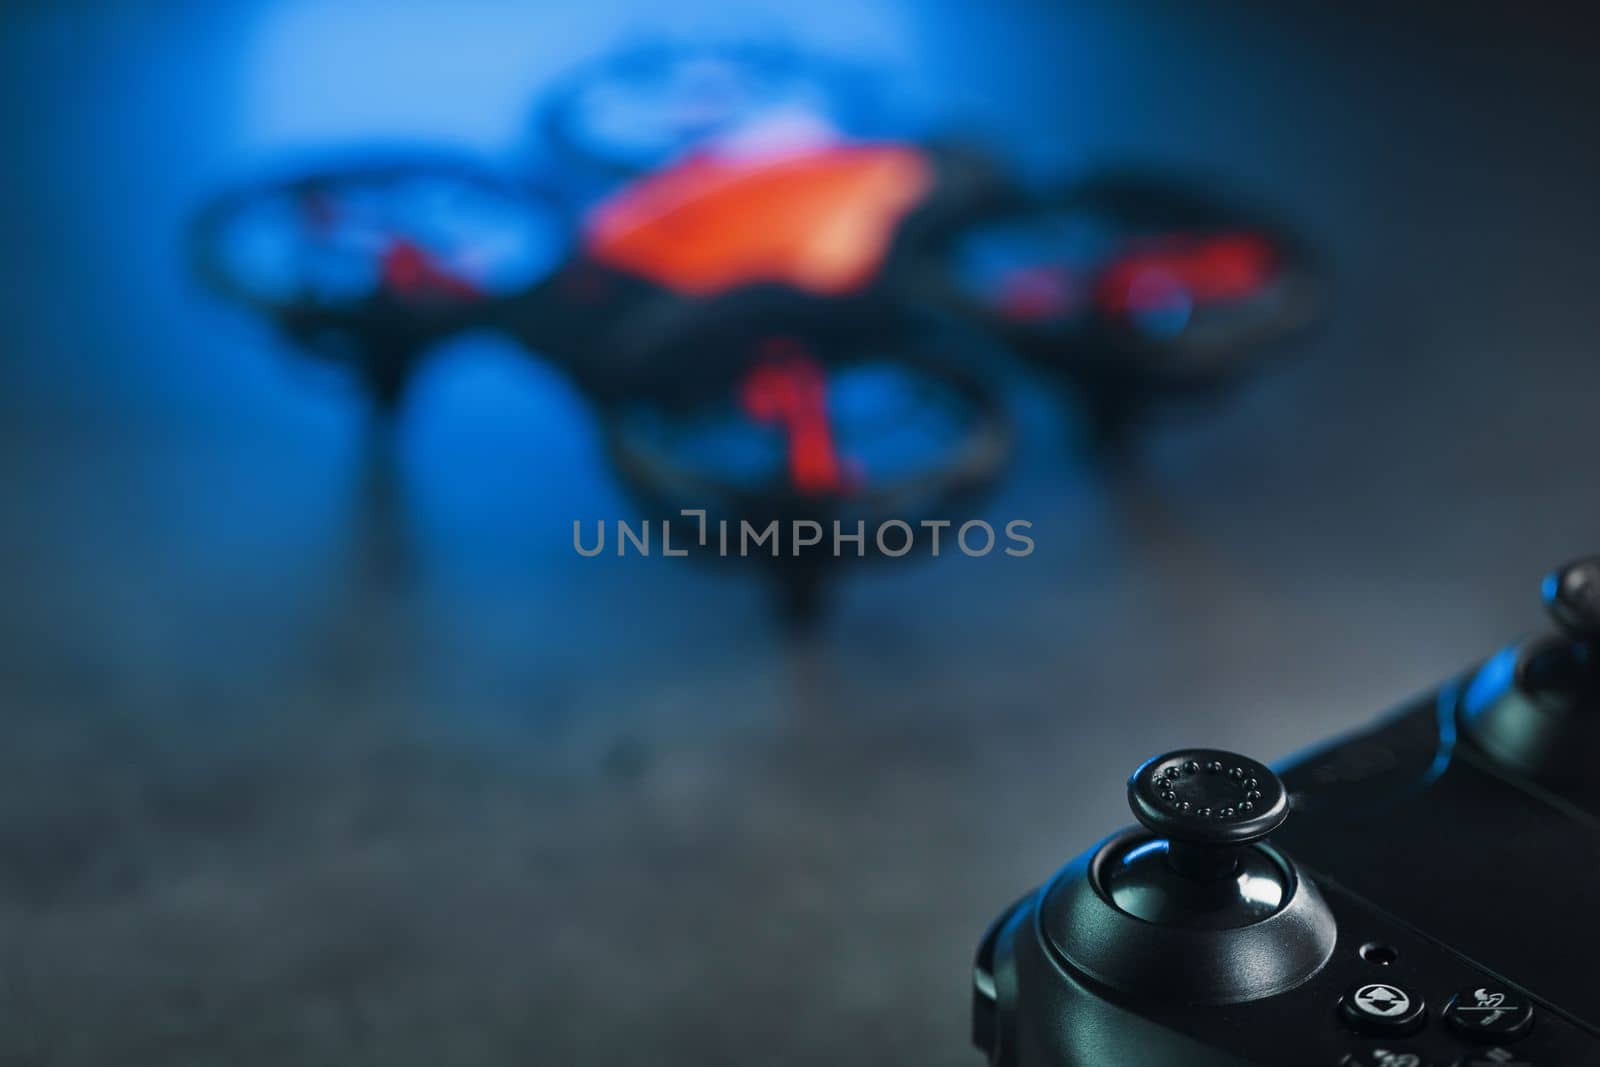 A reconnaissance quadcopter drone with an orange body a by AlexGrec